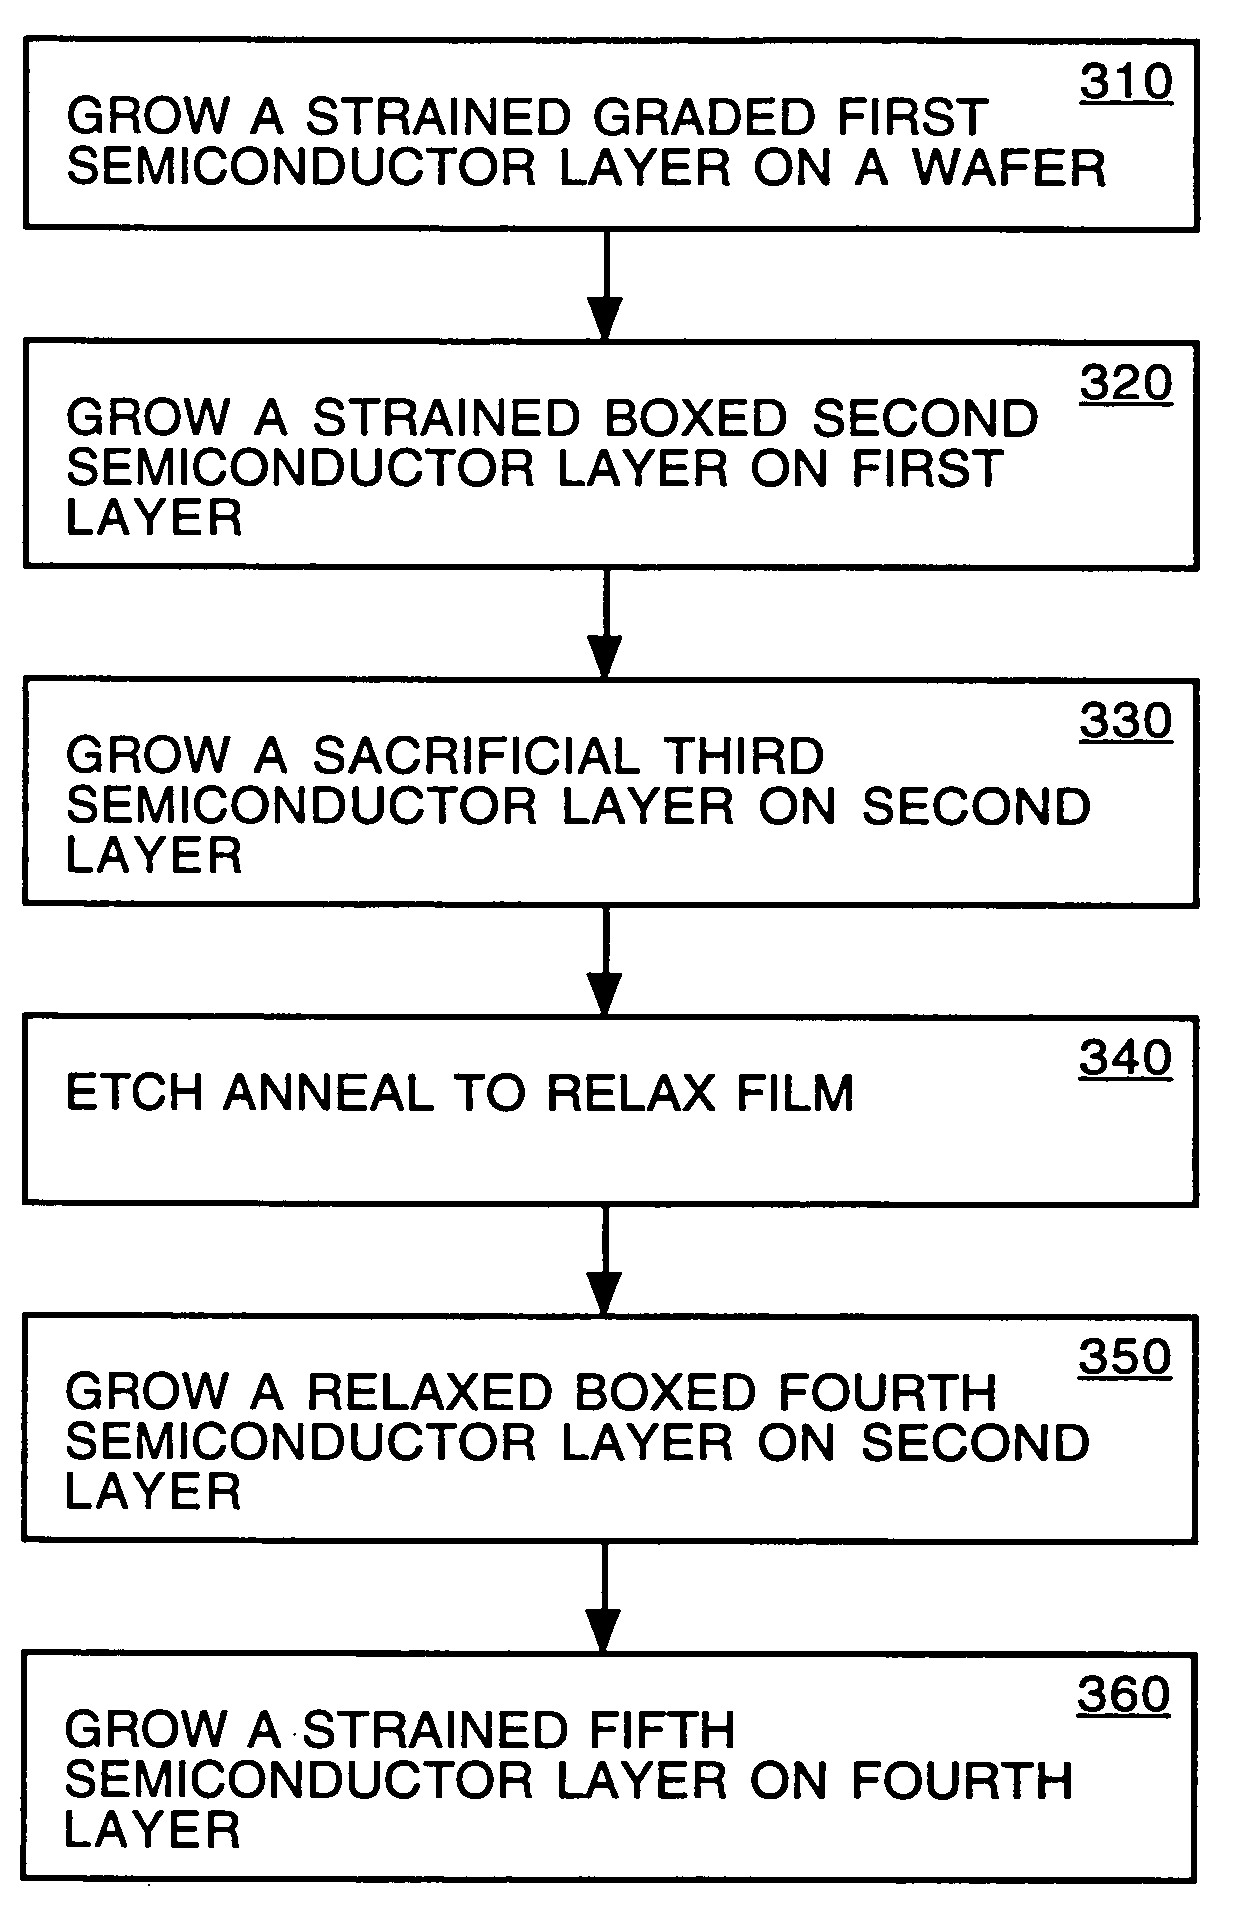 Non-contact etch annealing of strained layers